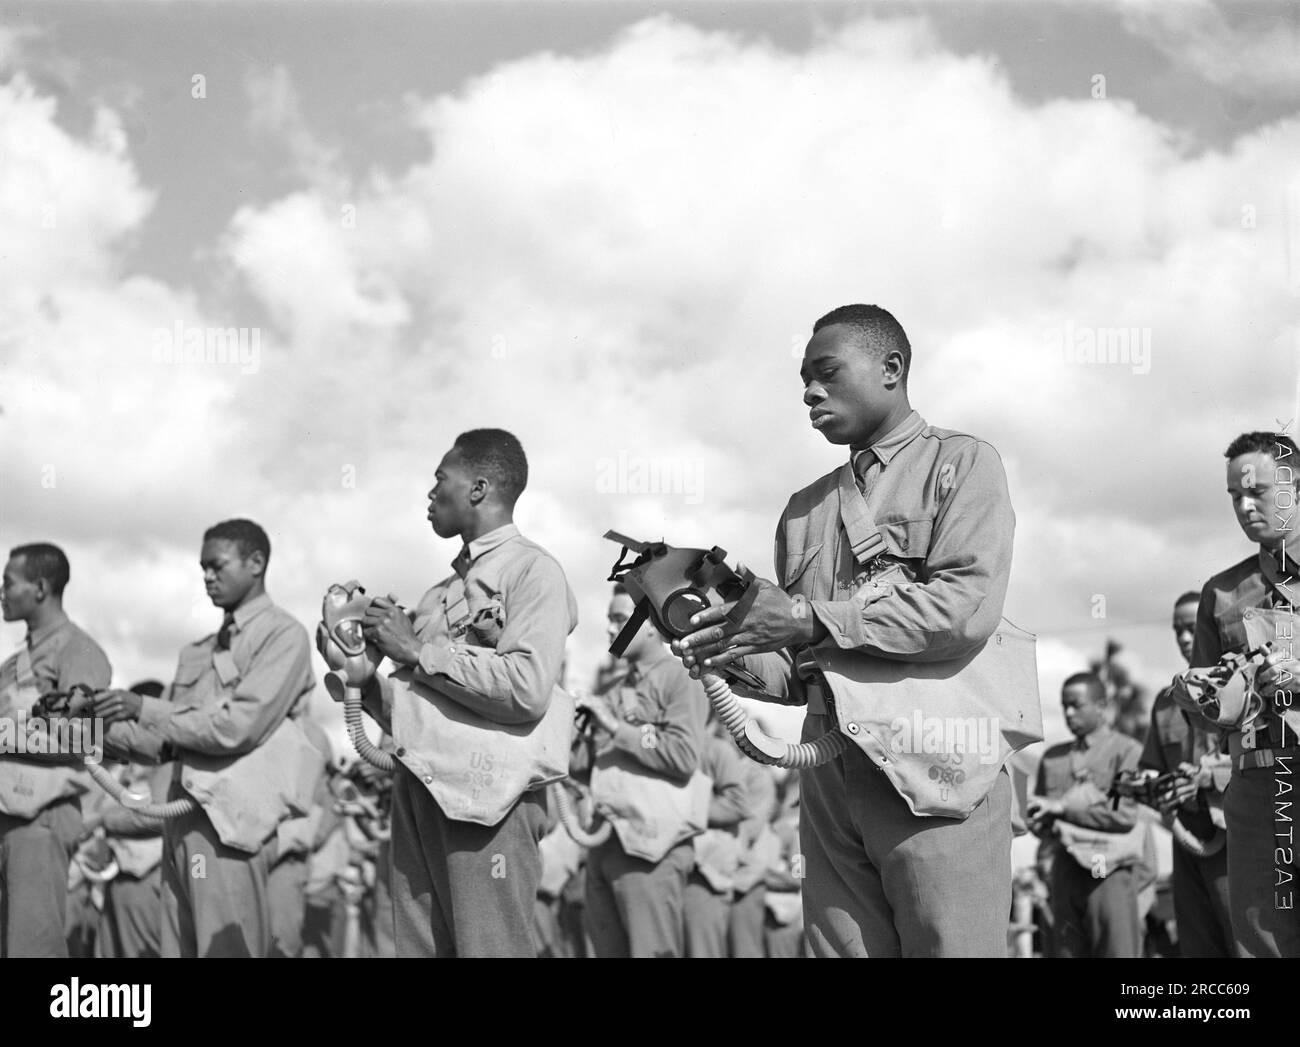 Soldiers of Company J, 41st Engineers, in gas mask drill, Fort Bragg, North Carolina, USA, Arthur Rothstein, U.S. Office of War Information, March 1942 Stock Photo